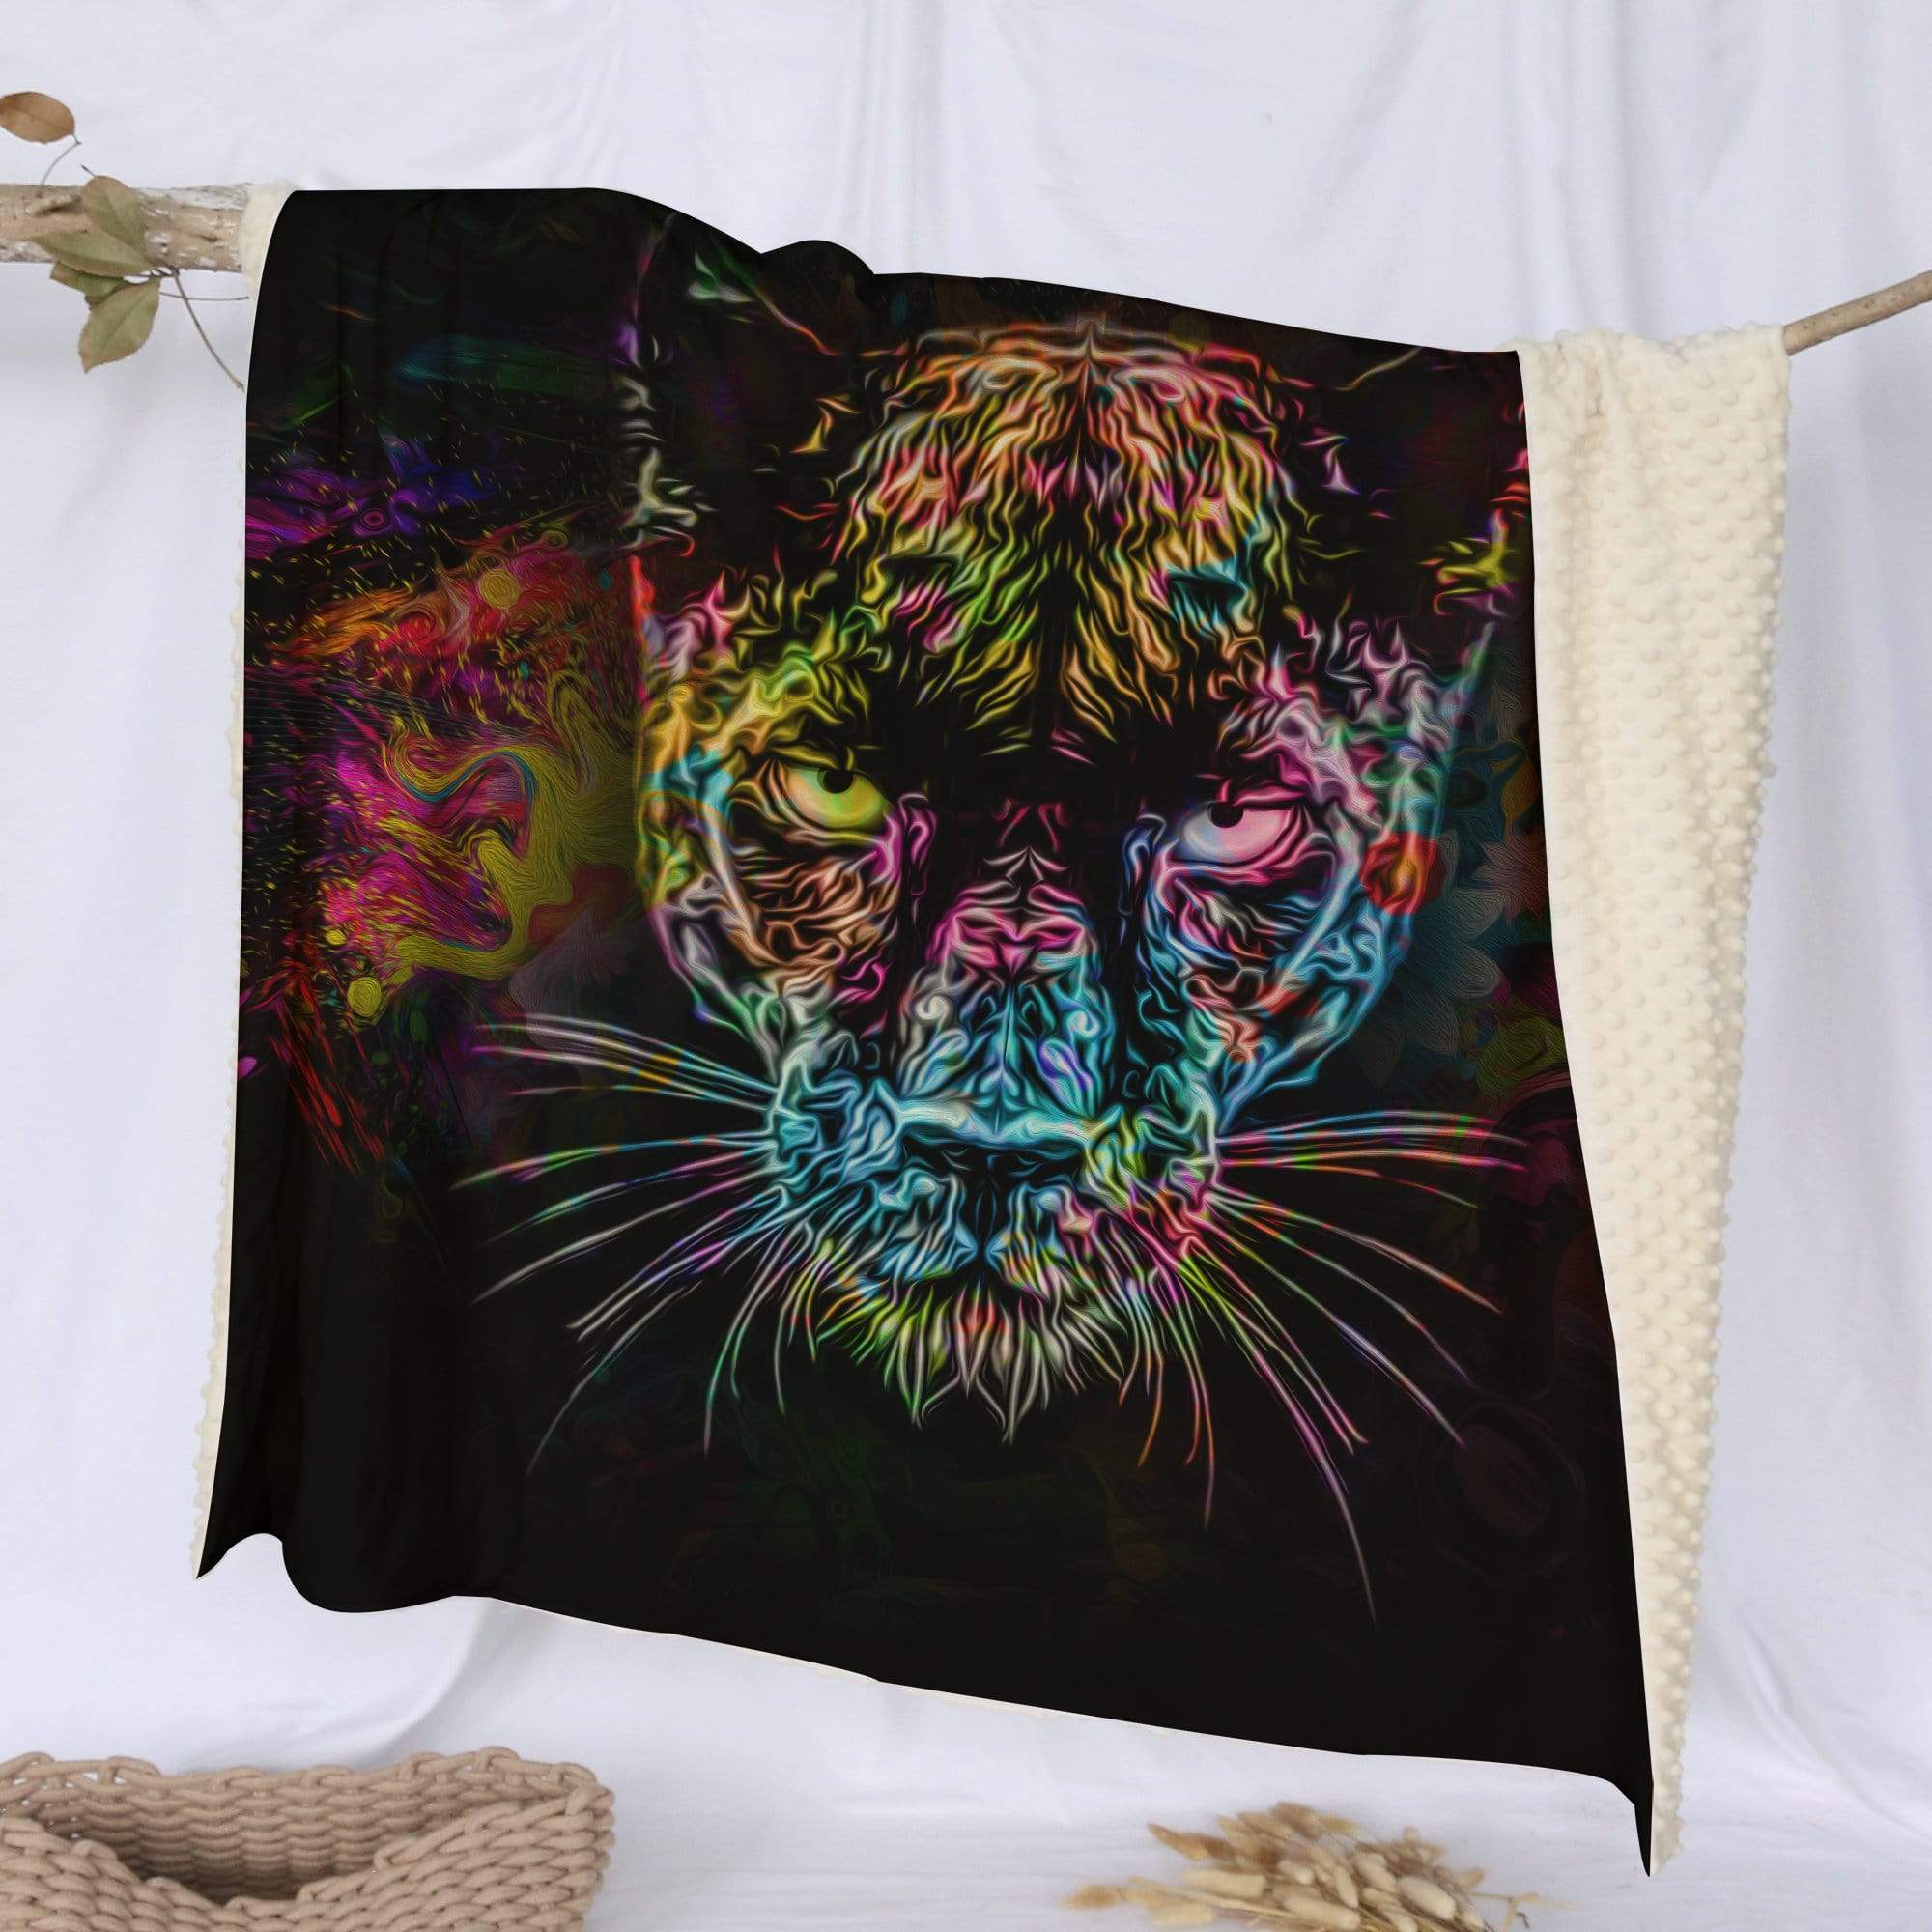 Black Panther Black Panther Deluxe Minky Blanket